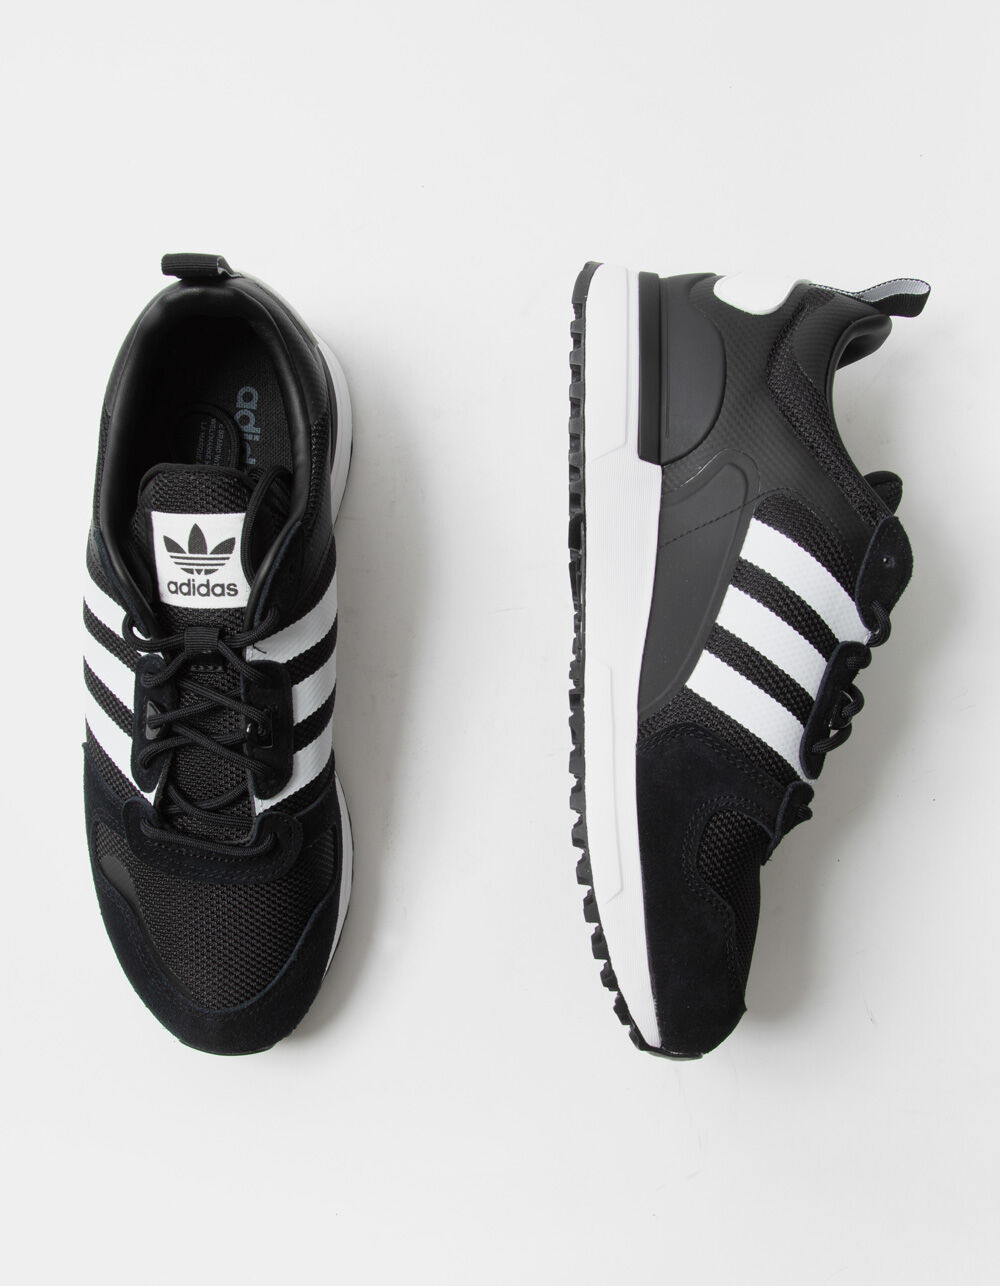 ADIDAS ZX 700 HD Shoes - BLKWH | Tillys